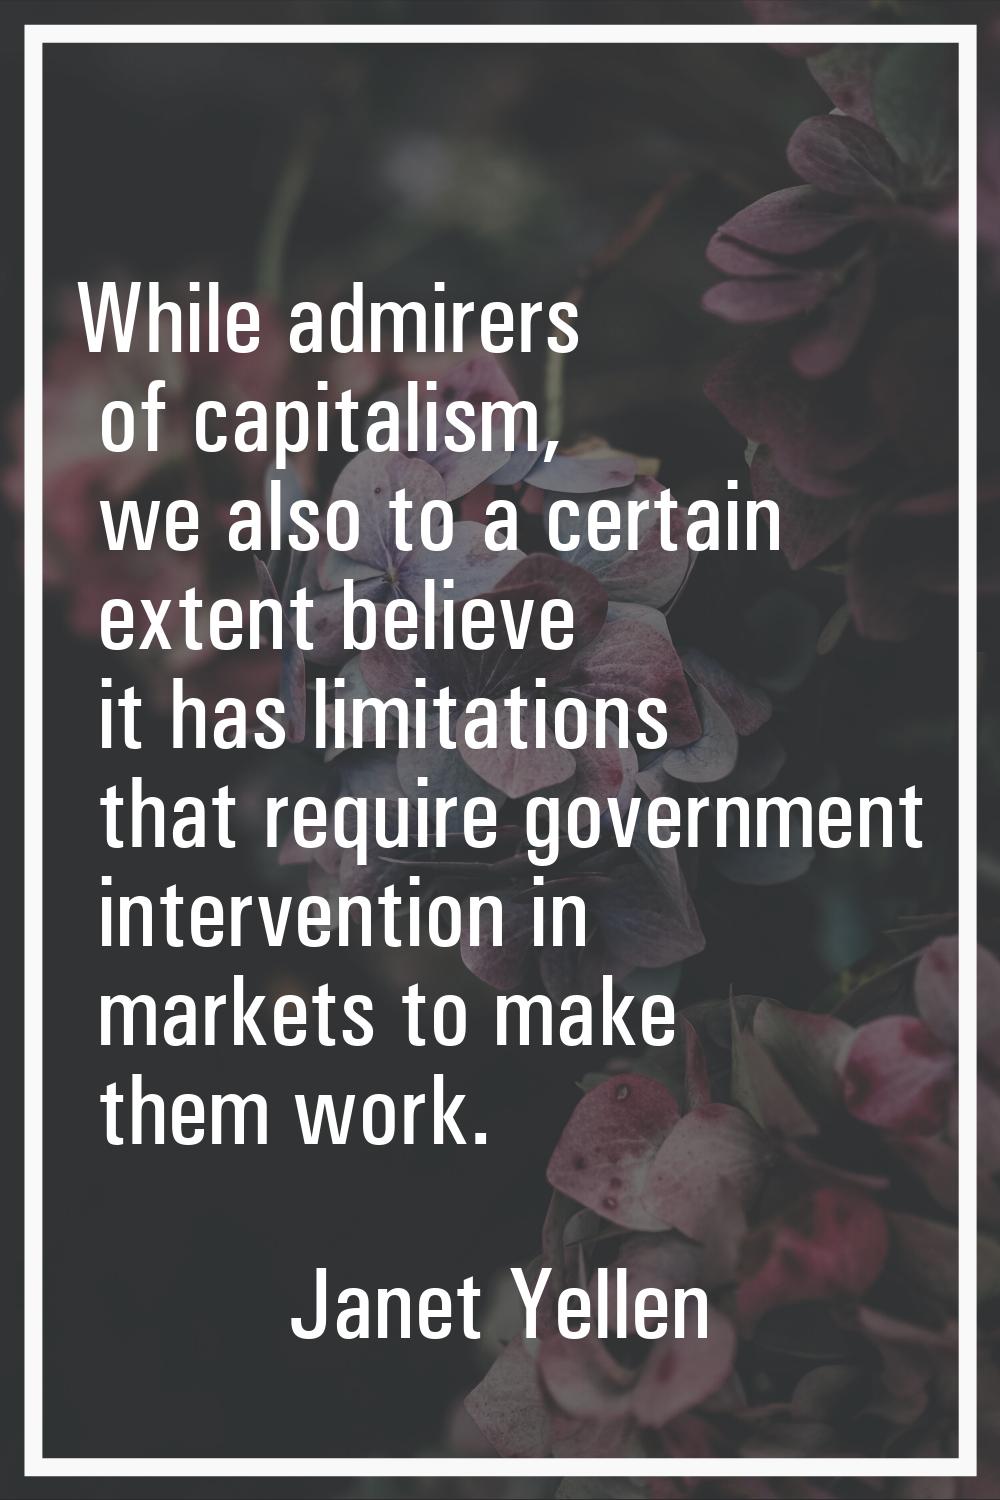 While admirers of capitalism, we also to a certain extent believe it has limitations that require g